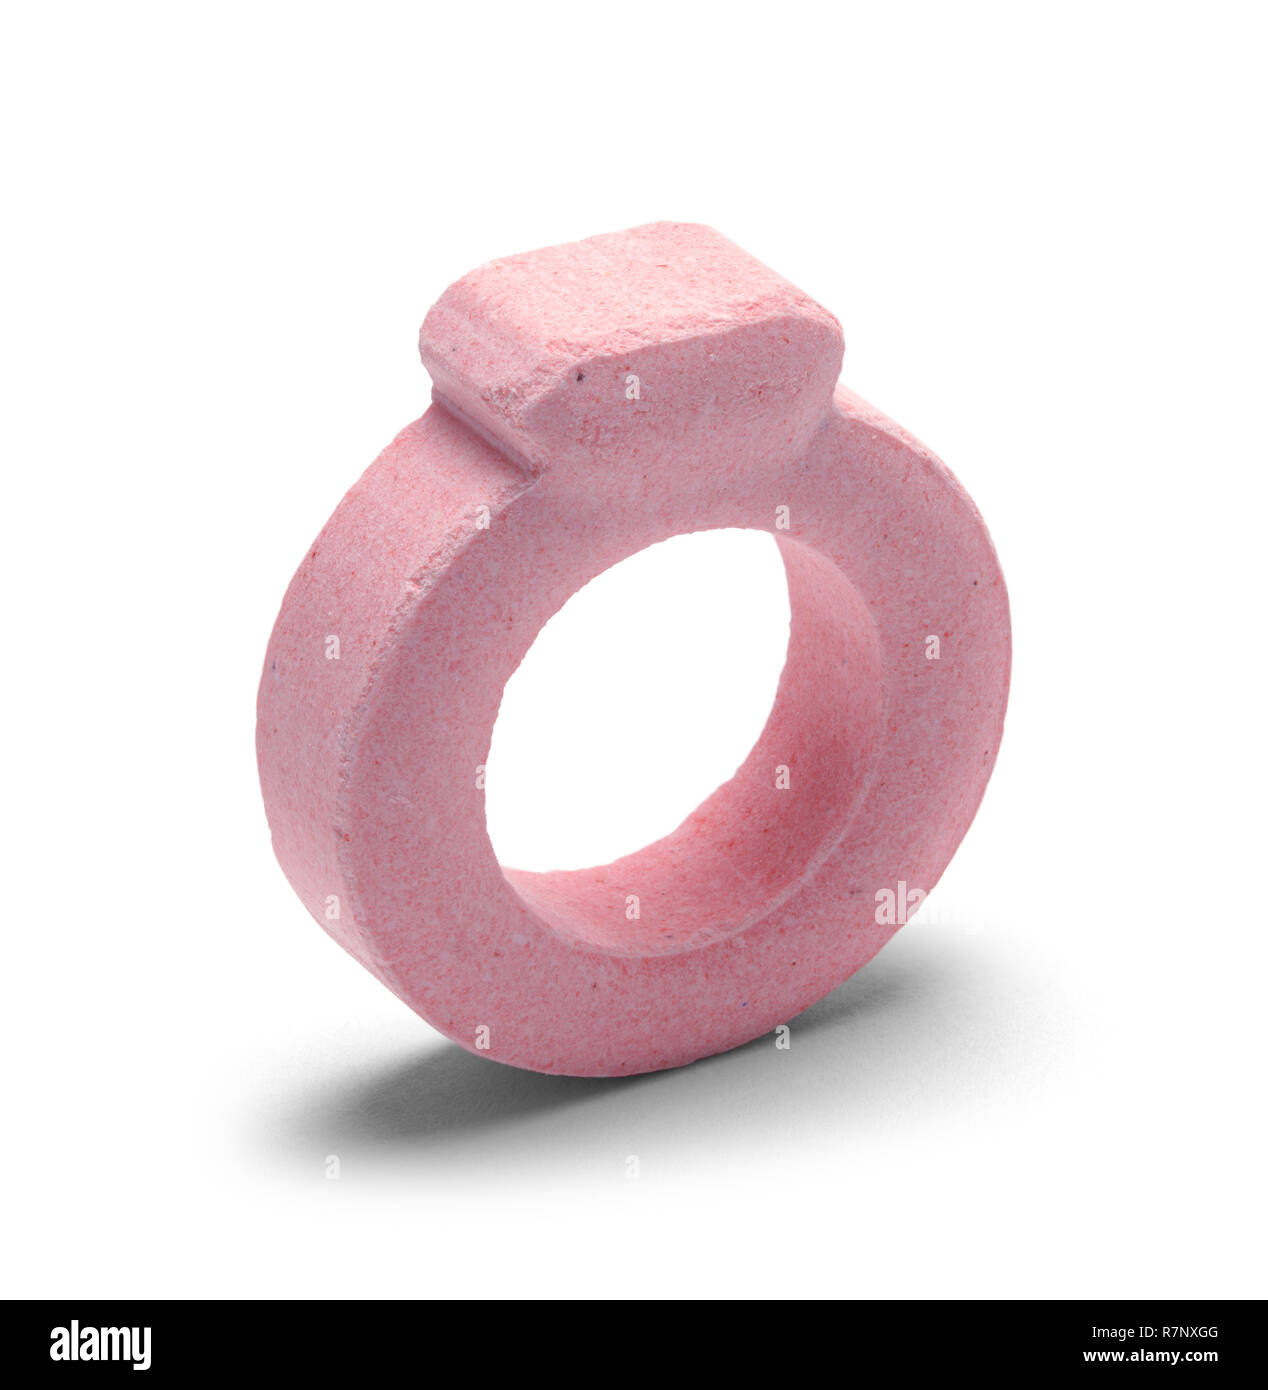 Pink Candy Ring Isolated on a White Backtground. Stock Photo